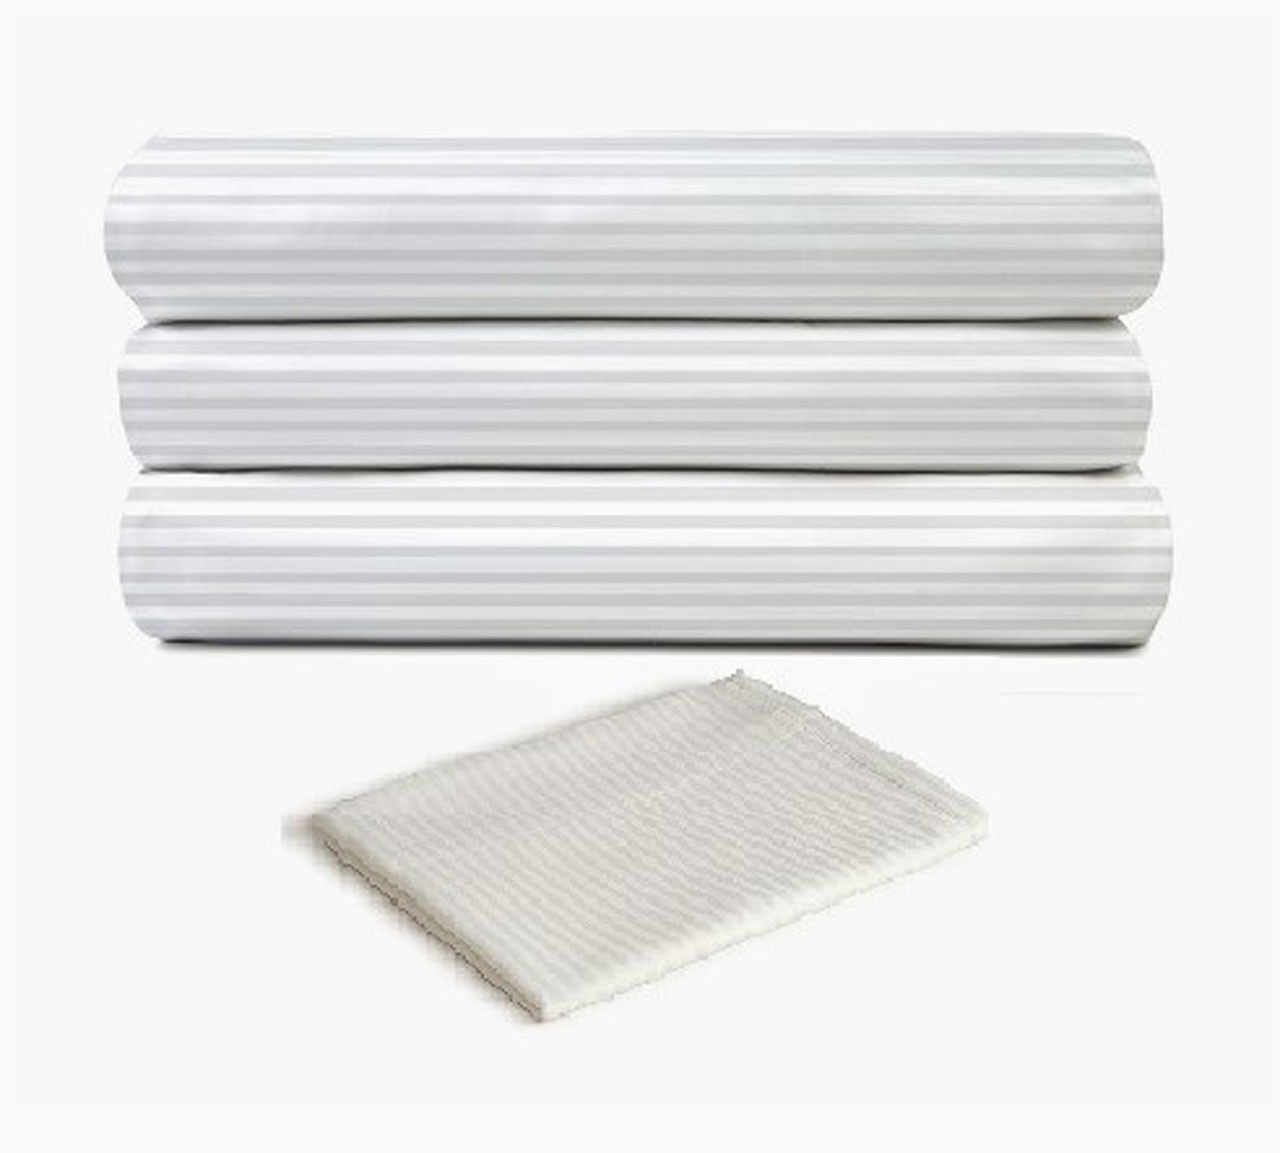 Does the hotel pillowcases wholesale by Golden Mills have a stripe variant?